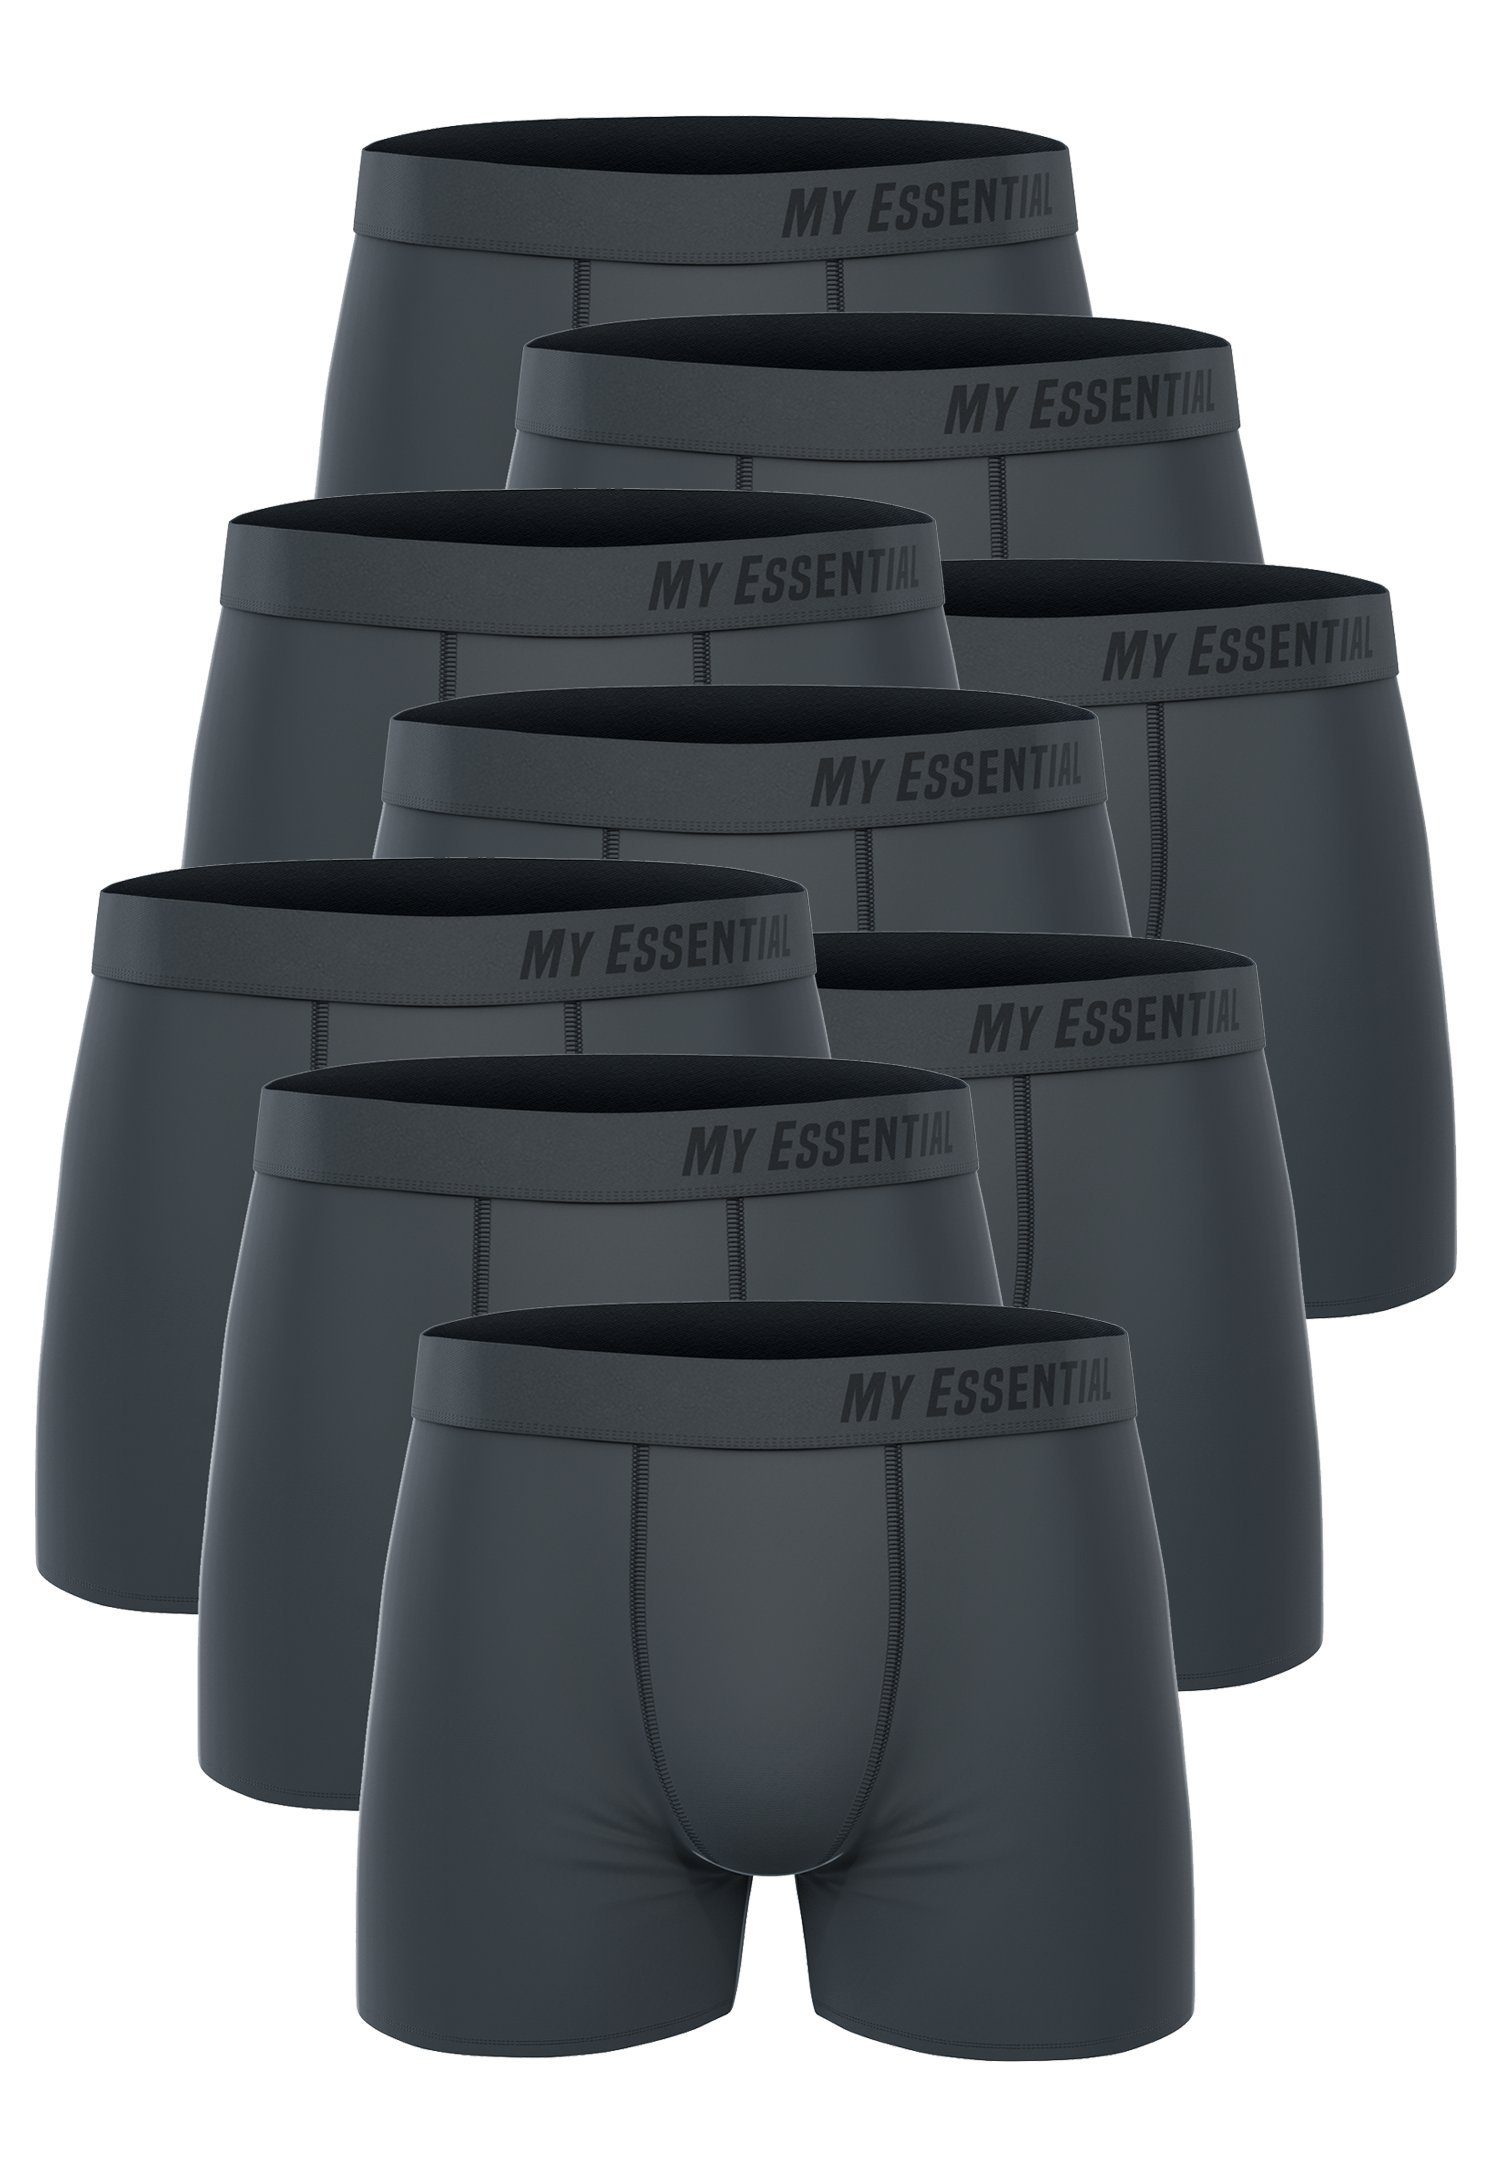 My Essential Clothing Boxershorts My Essential 9 Pack Boxers Cotton Bio (Spar-Pack, 9-St., 9er-Pack) Grey